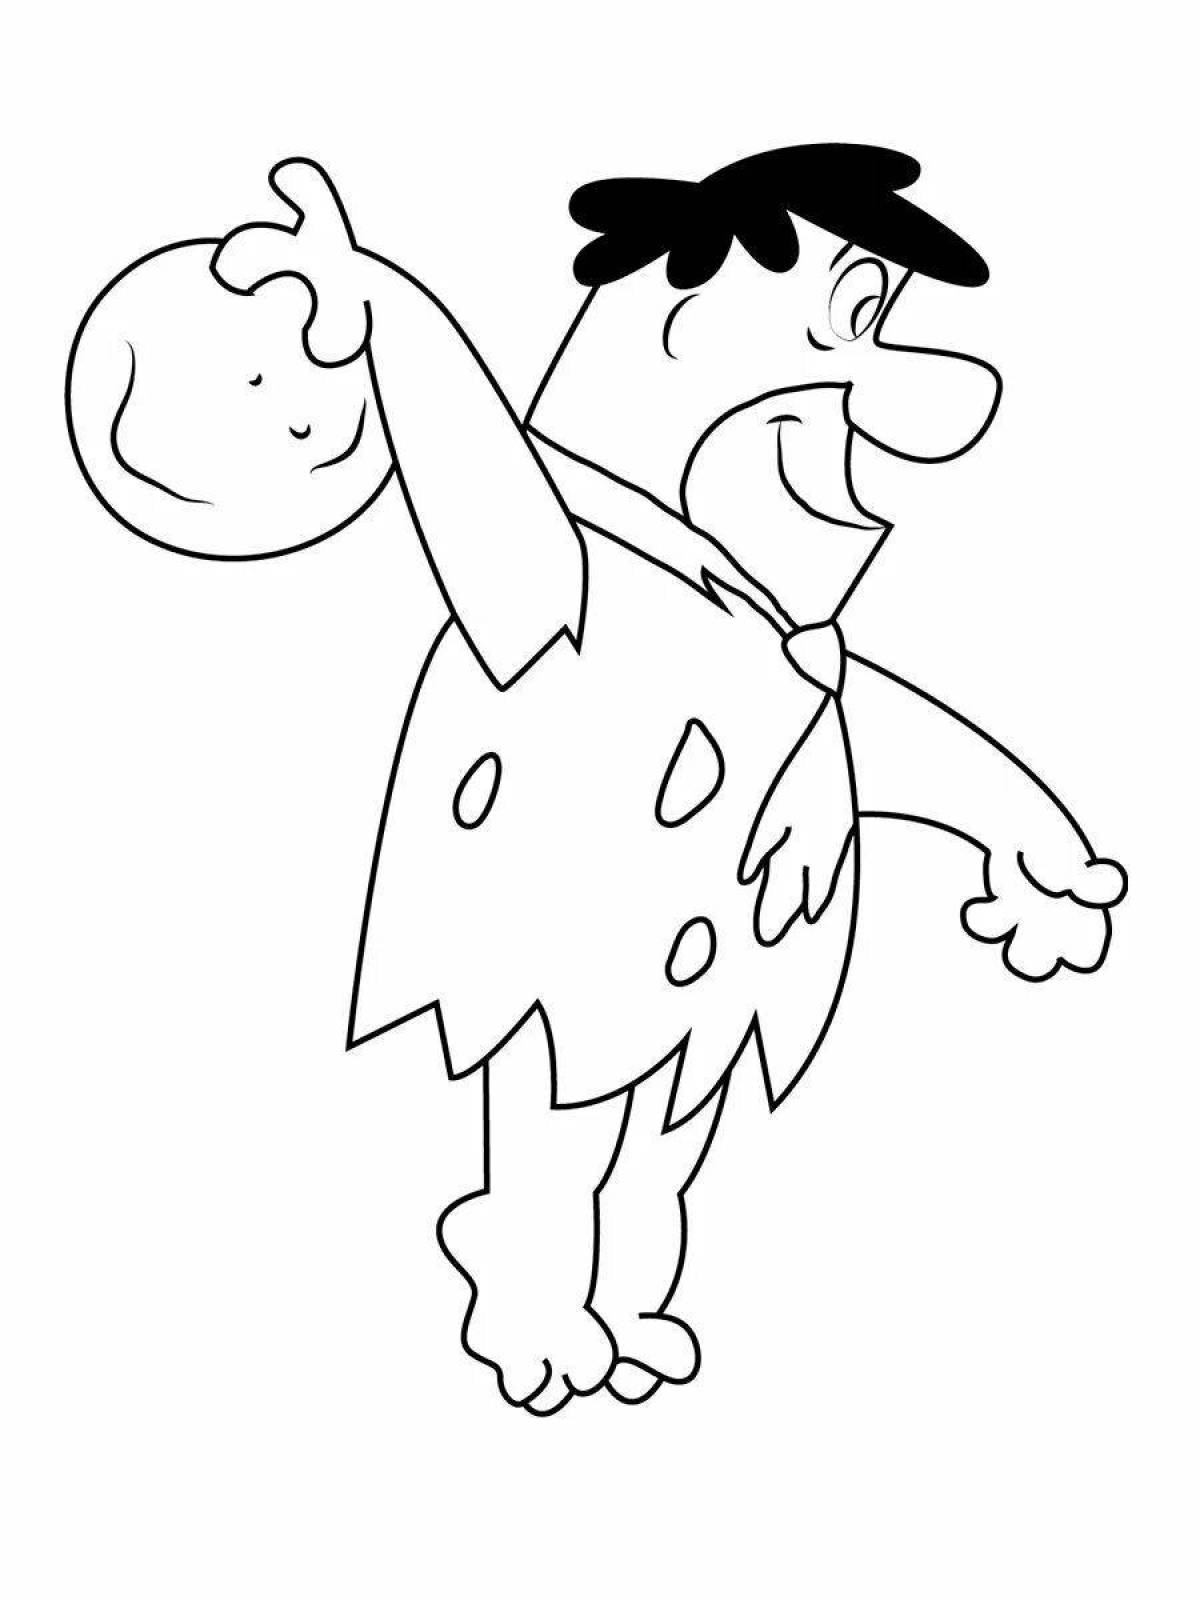 Fred flintstone's spectacular coloring book